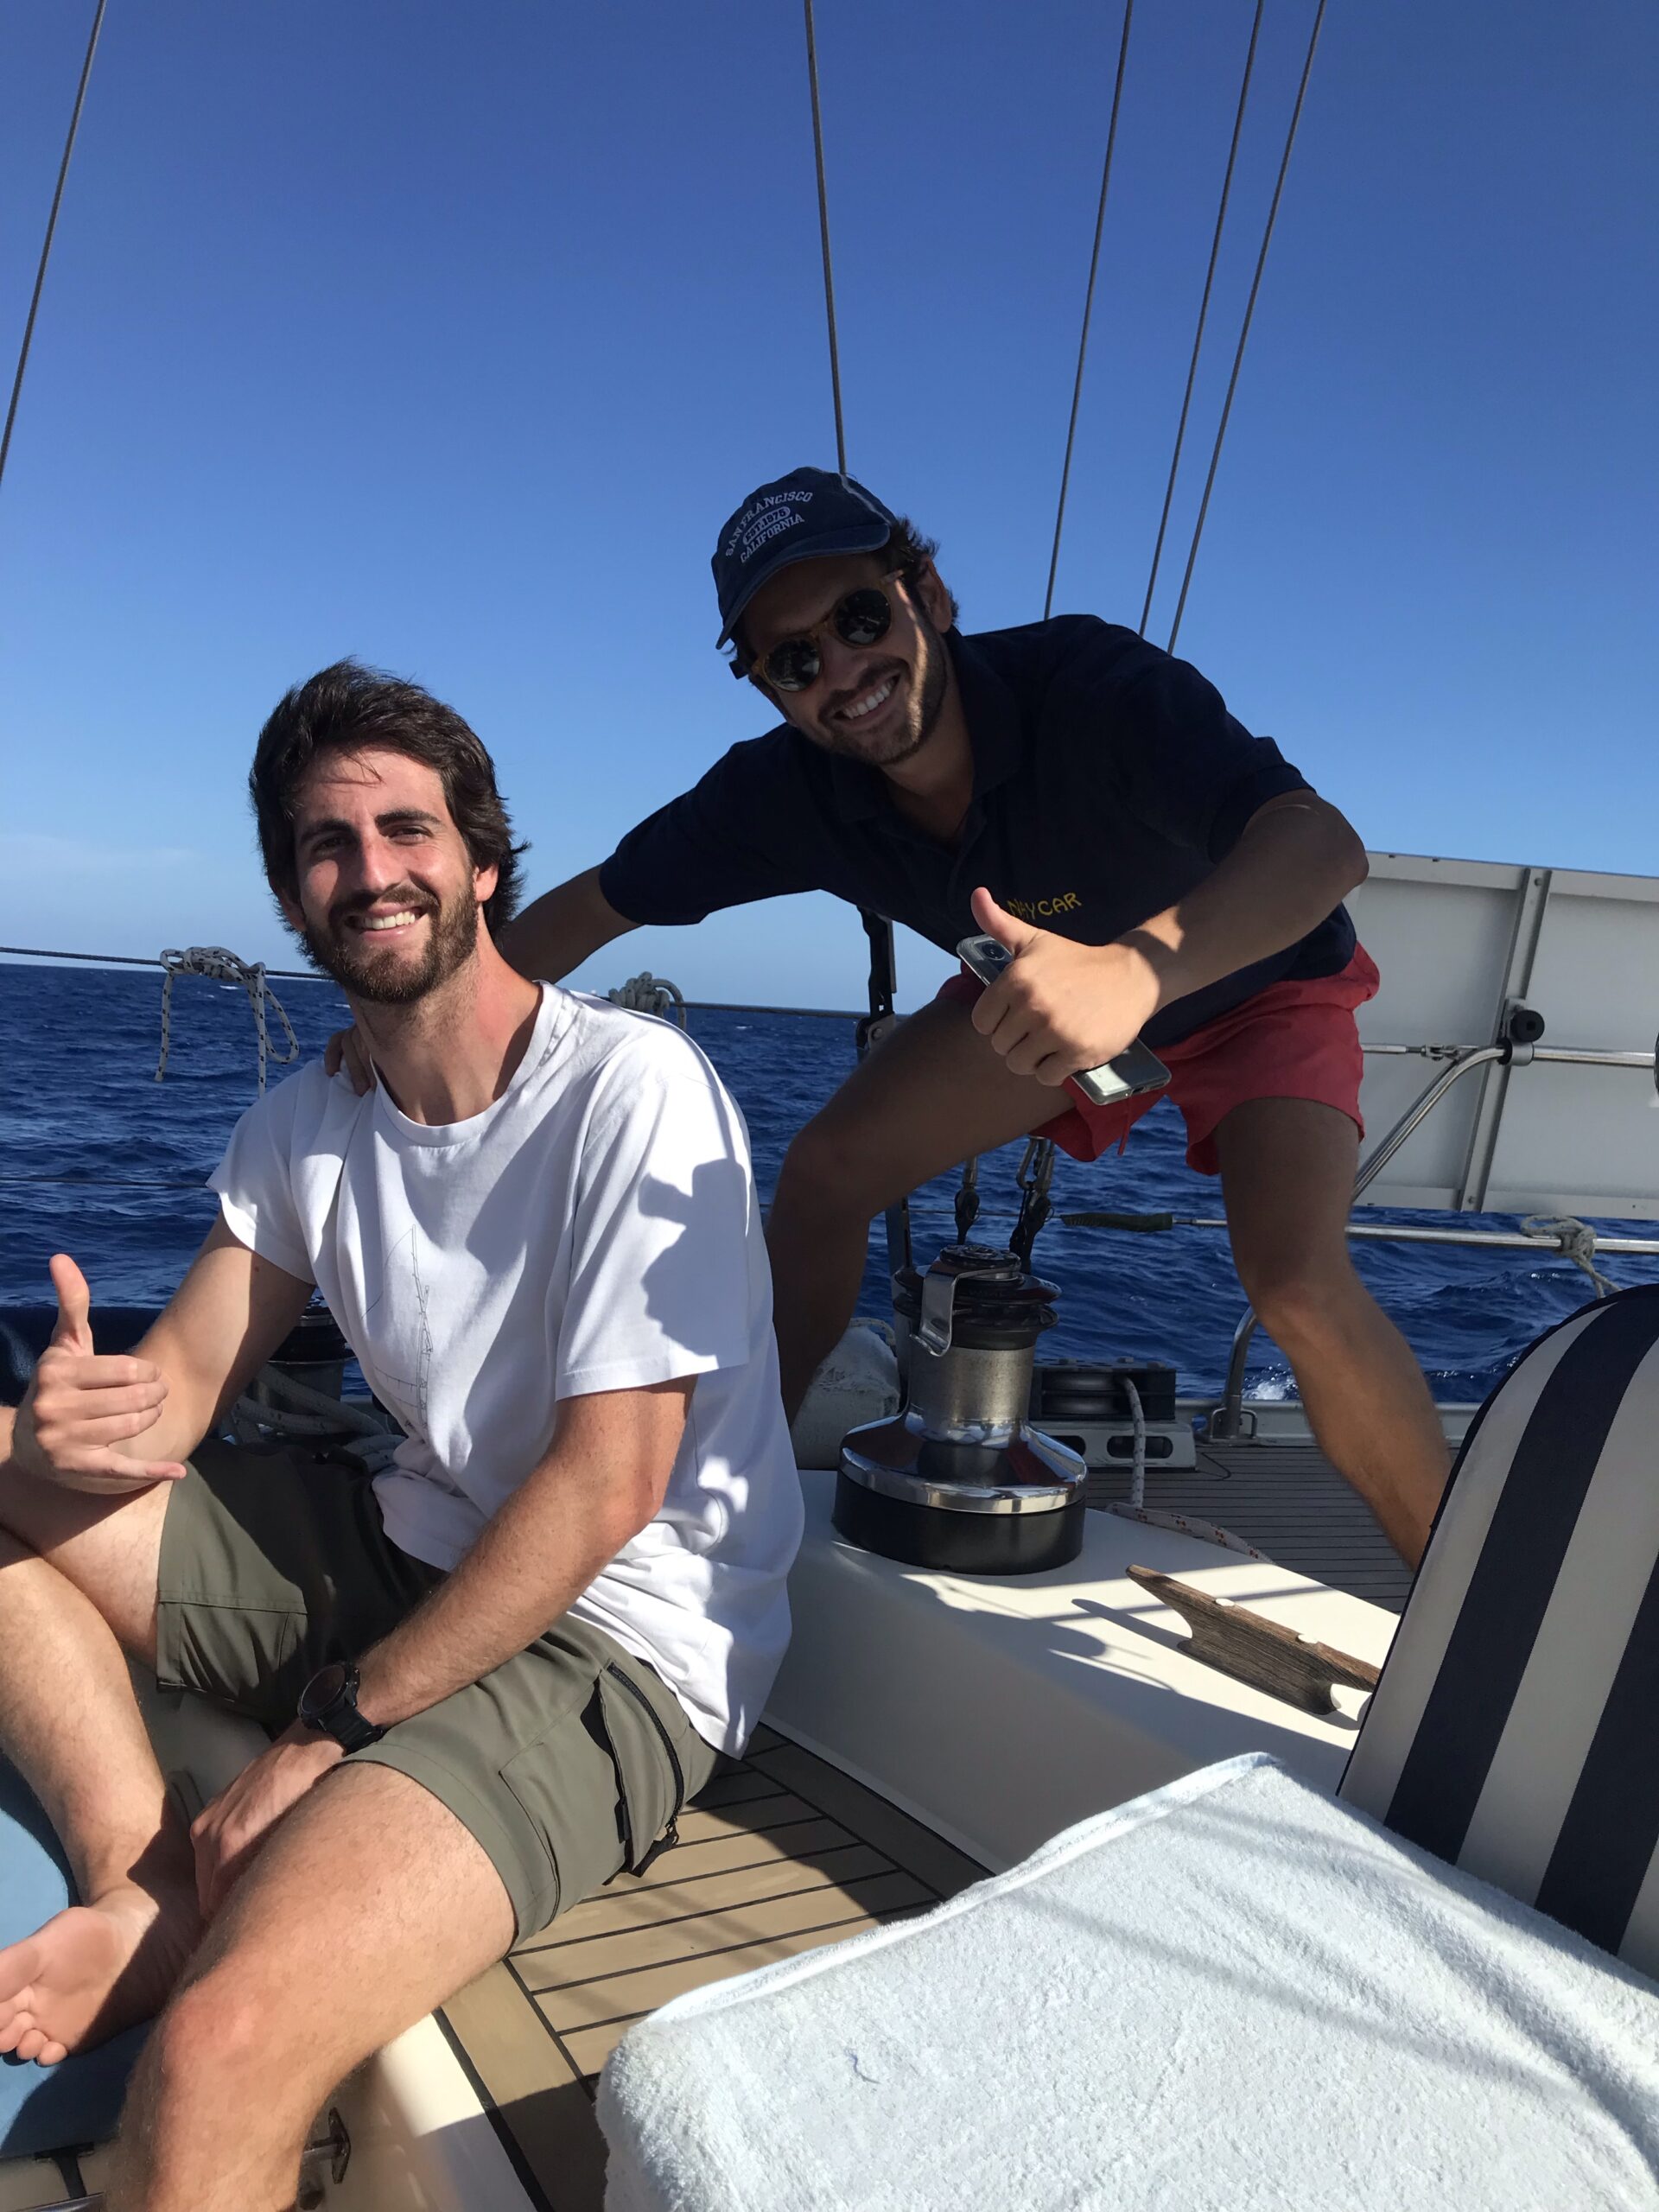 You are currently viewing Preparing to leave for the first leg of our Atlantic adventure. This is our crew Marcos & Willi looking forward to some amazing sailing